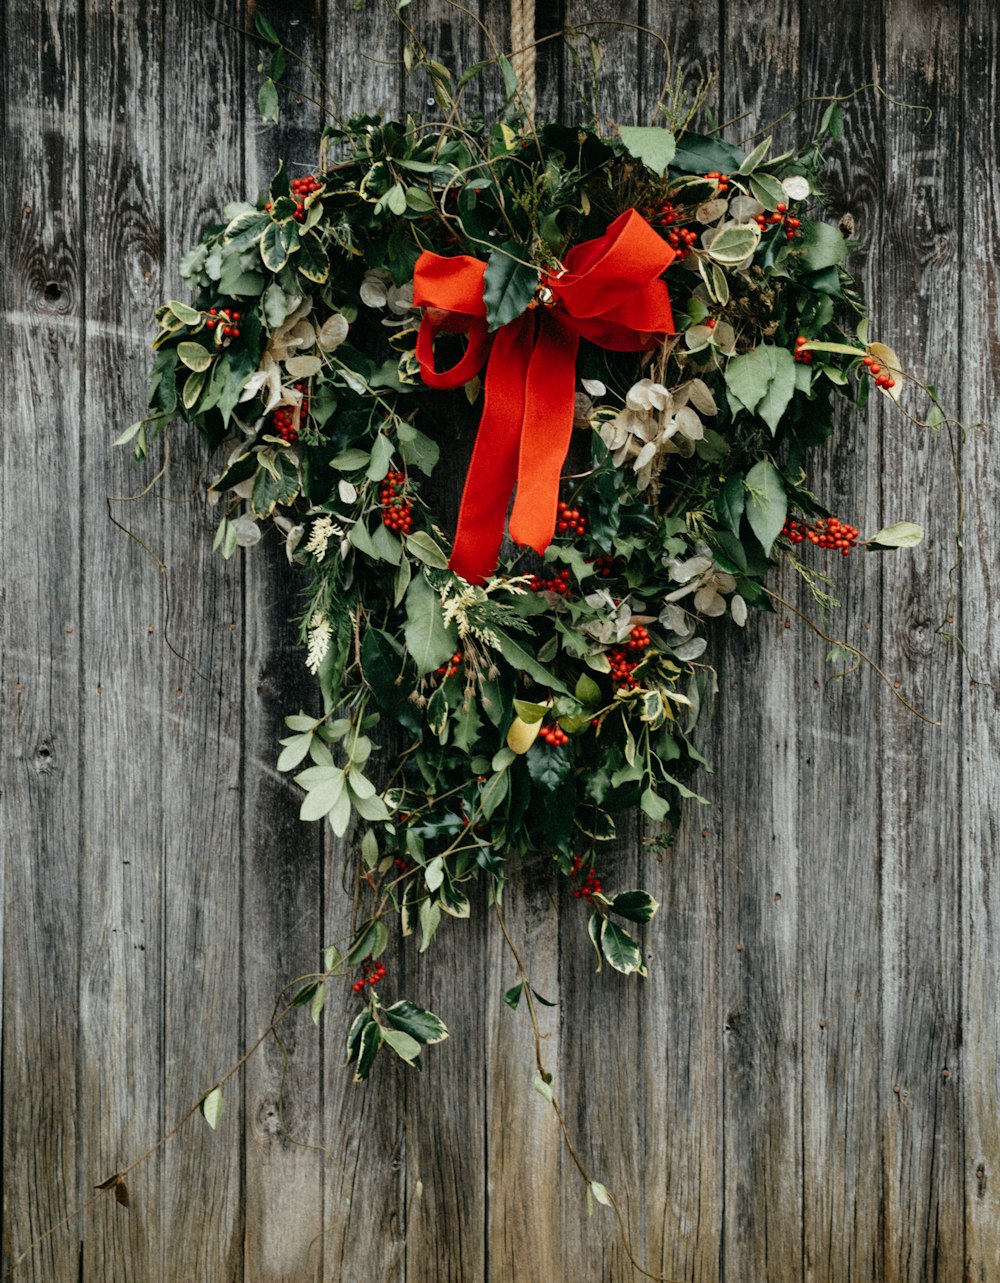 a wreath hanging on the side of a wooden fence